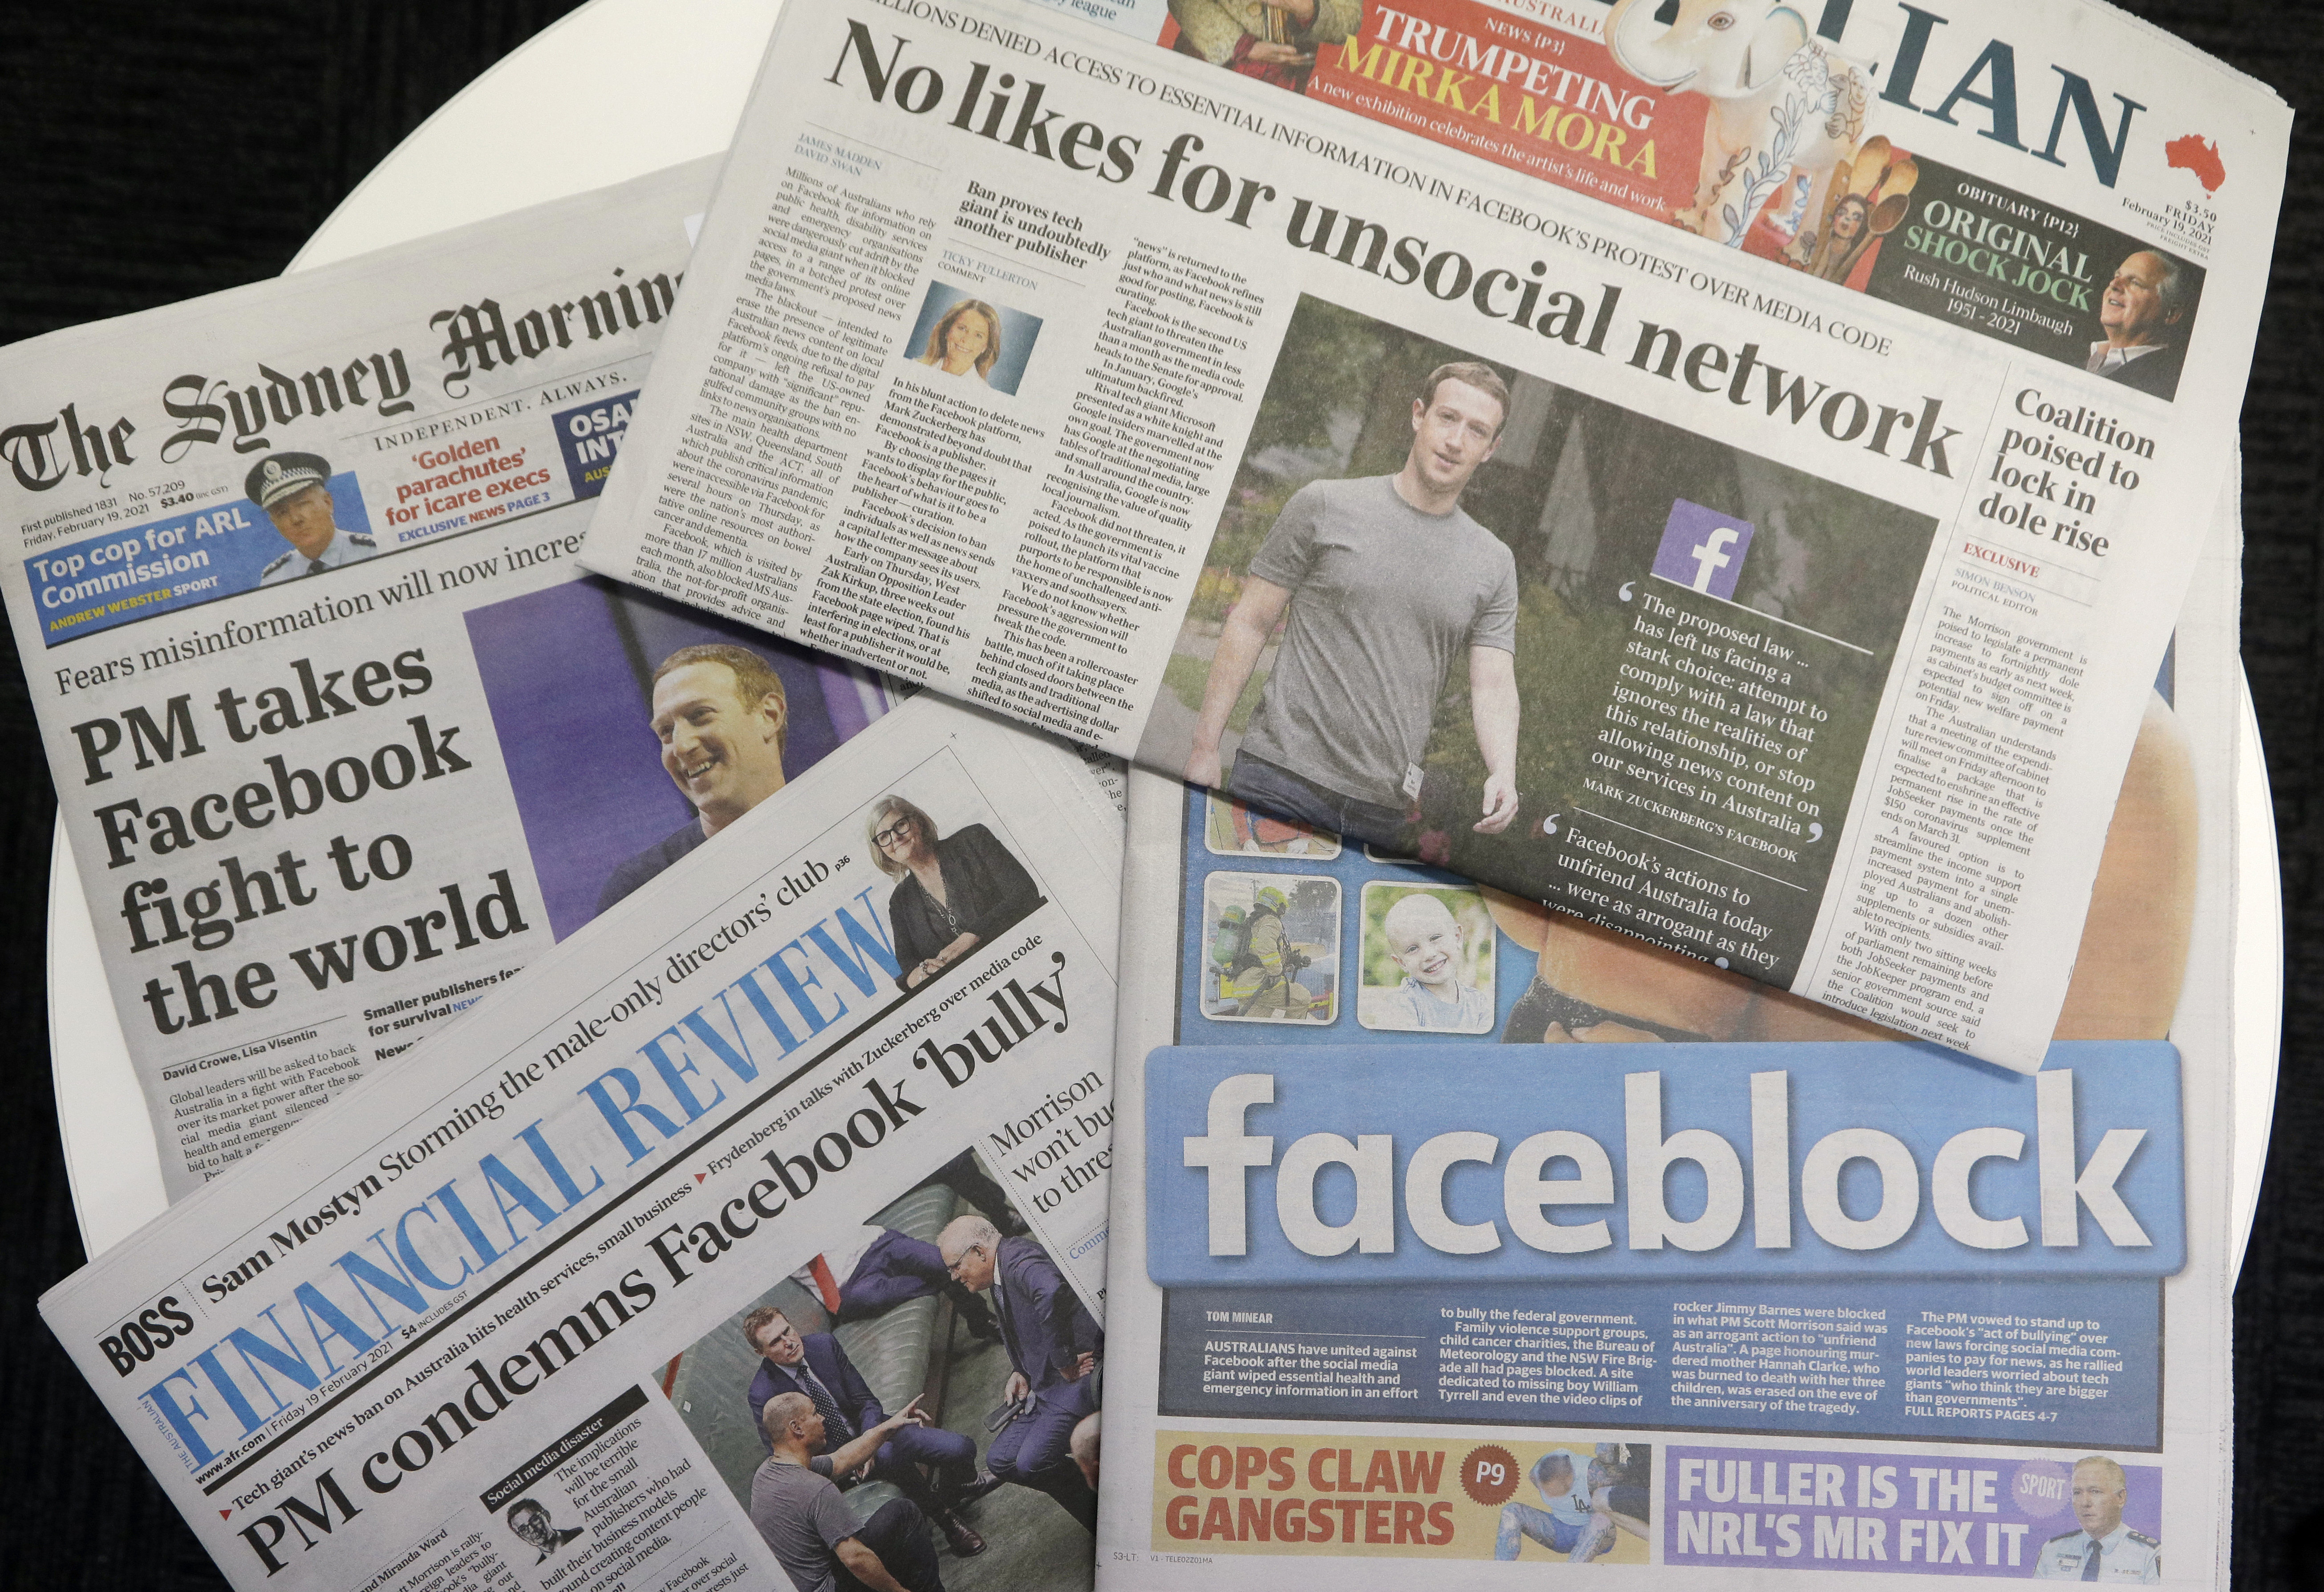 Opinion: Pay for news? If anything, the news business should be paying Facebook Google - The Globe and Mail